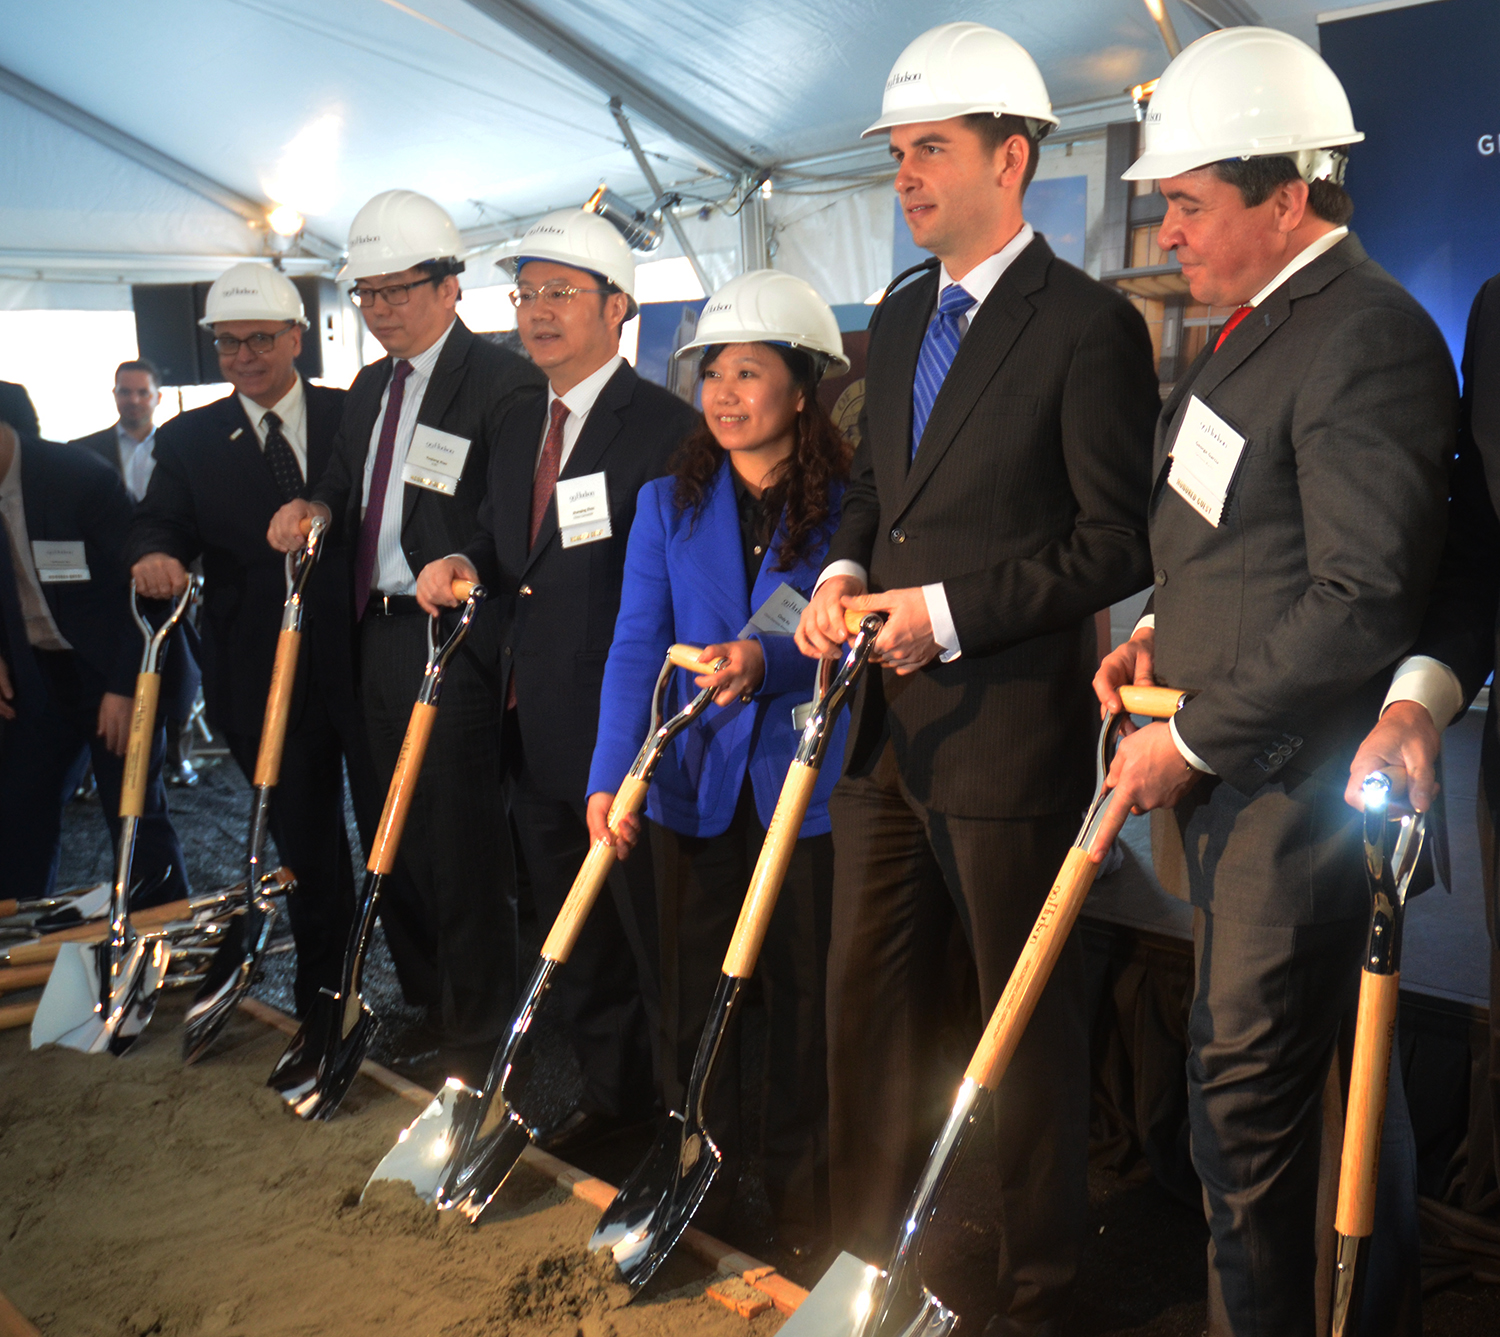 Cindy Xu of China Overseas America (in blue) and Jersey City Mayor Steven Fulop (to her left) at the groundbreaking for 99 Hudson Street.